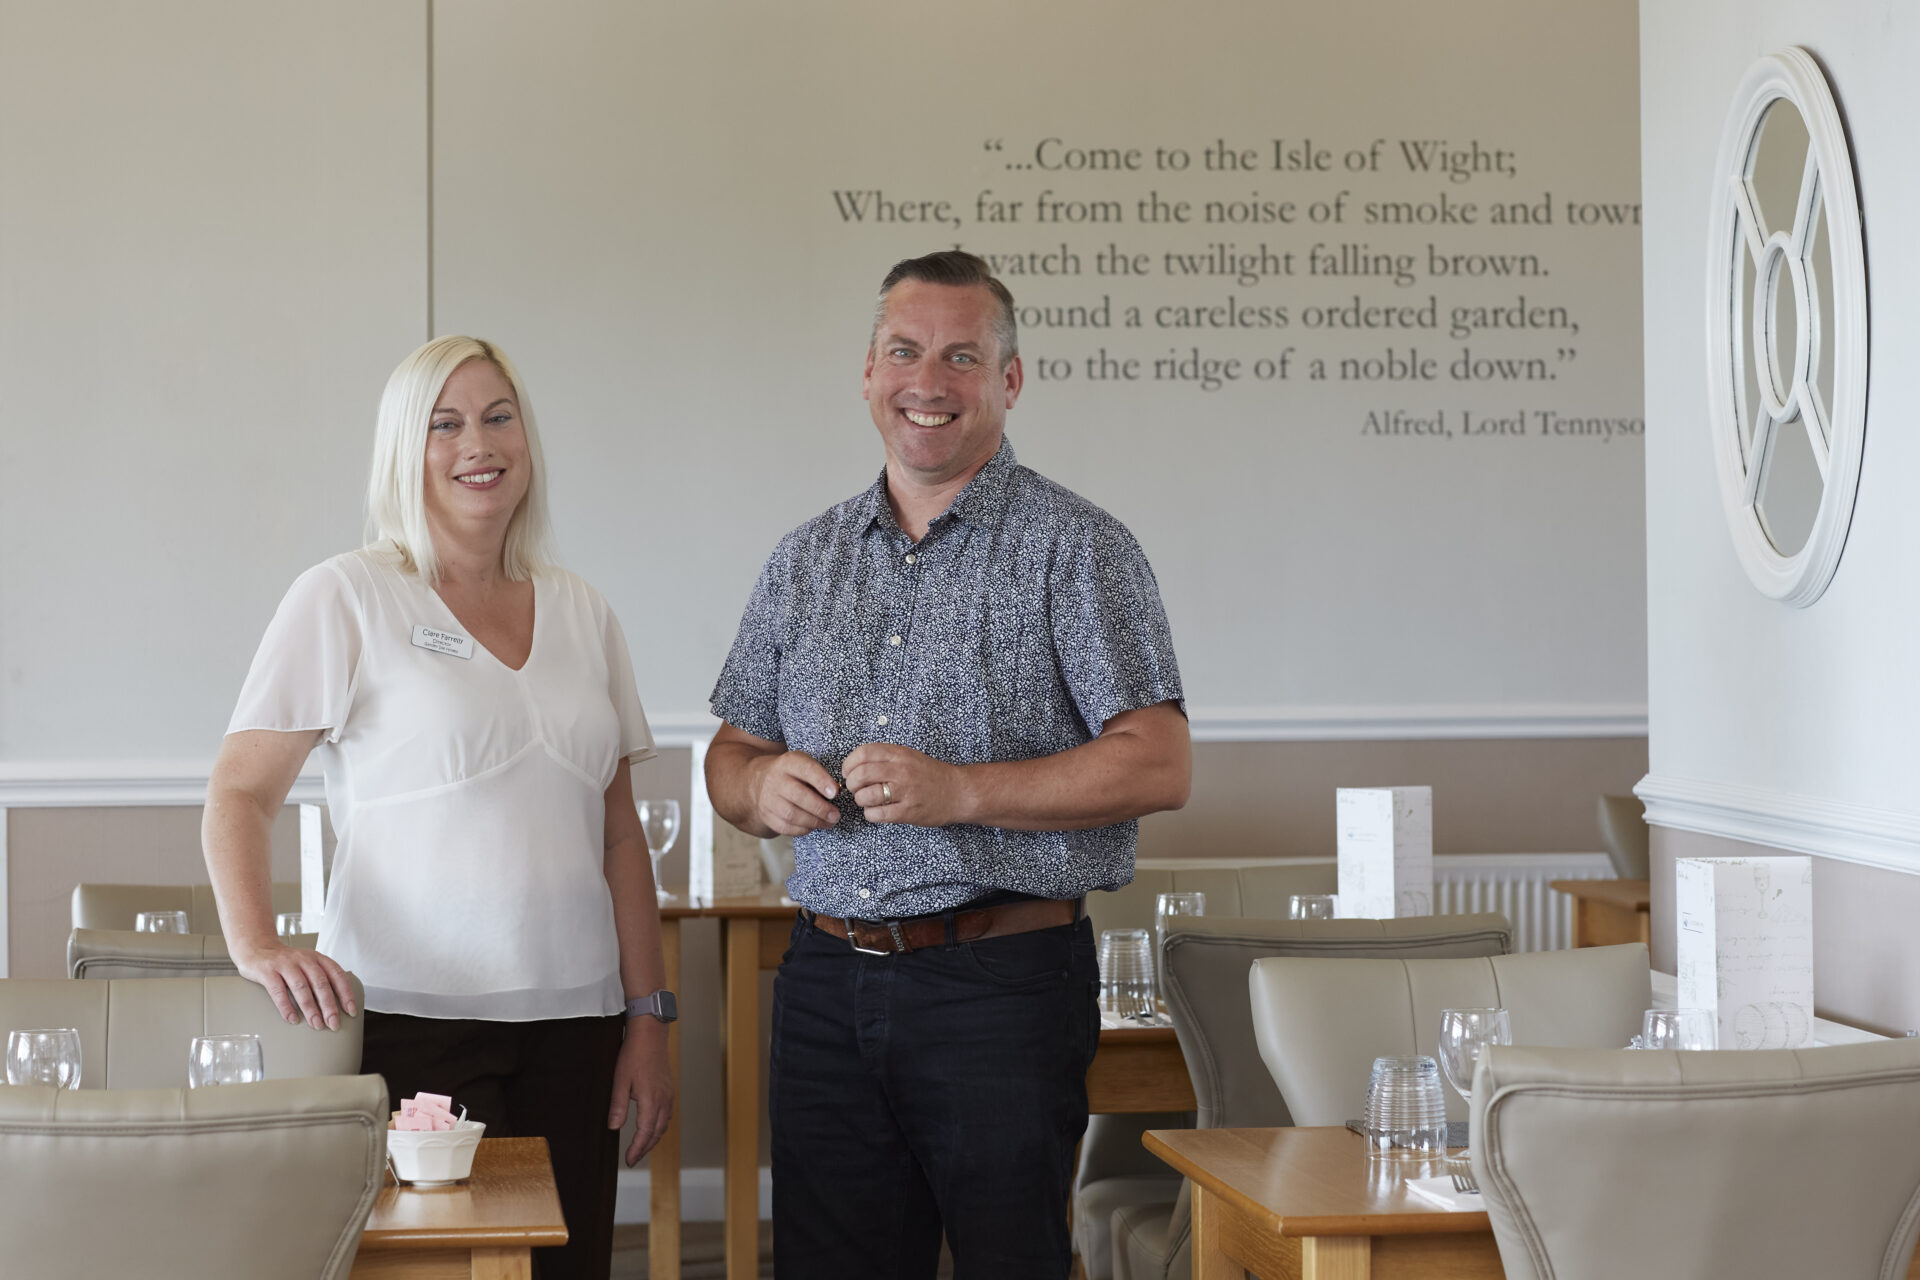 Clare Farrelly and SteveWells Directors, Luccombe Hotels, Isle of Wight